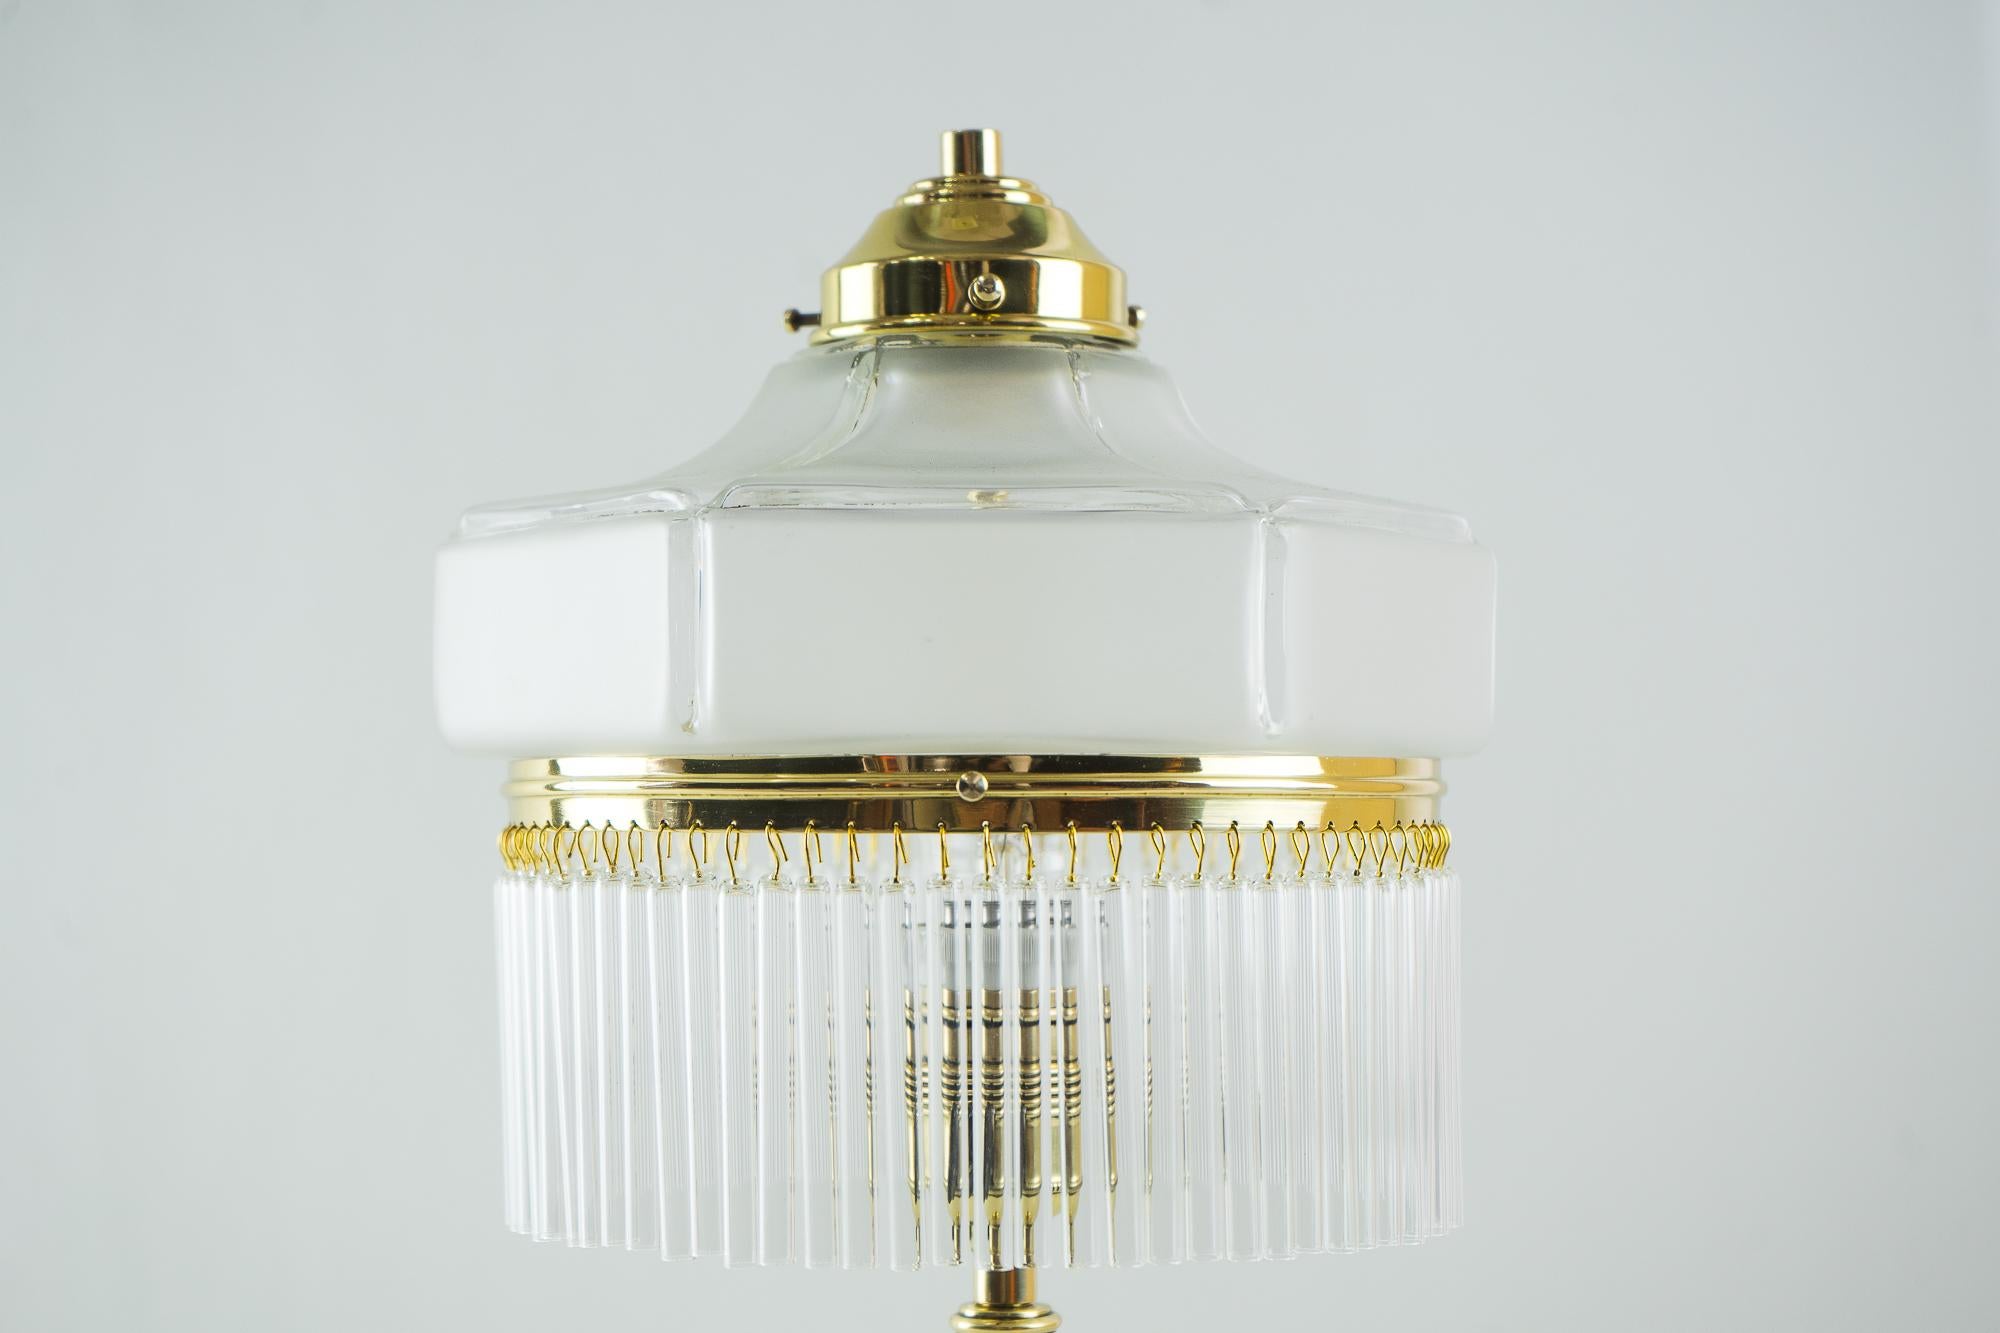 Art Deco table lamp, Vienna, 1920s
Brass polished and stove enameled
Original glass shade
The glass sticks are replaced (new).